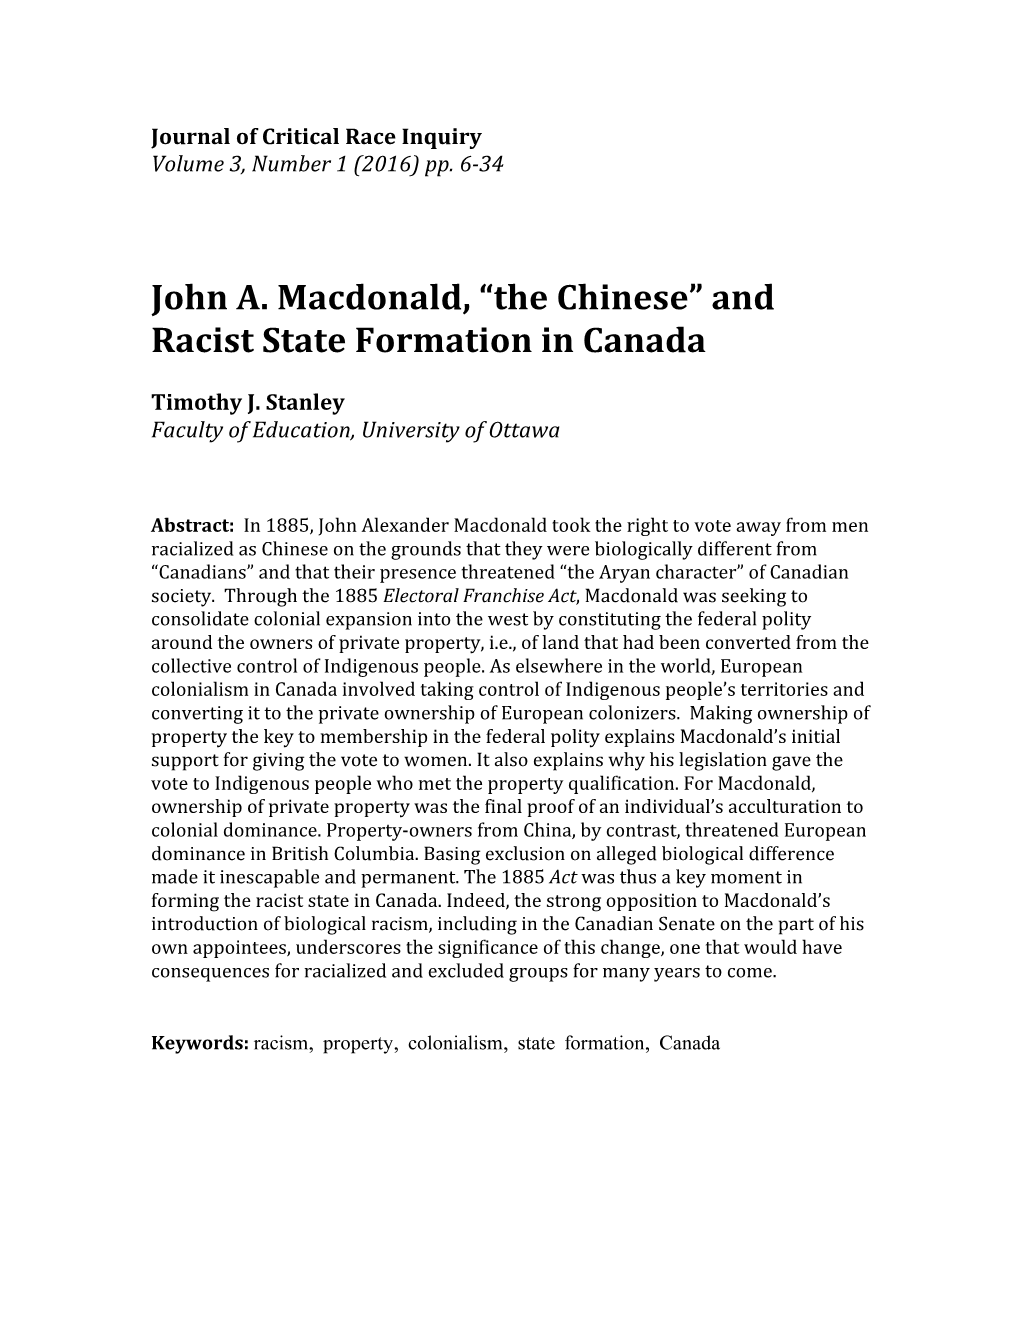 And Racist State Formation in Canada